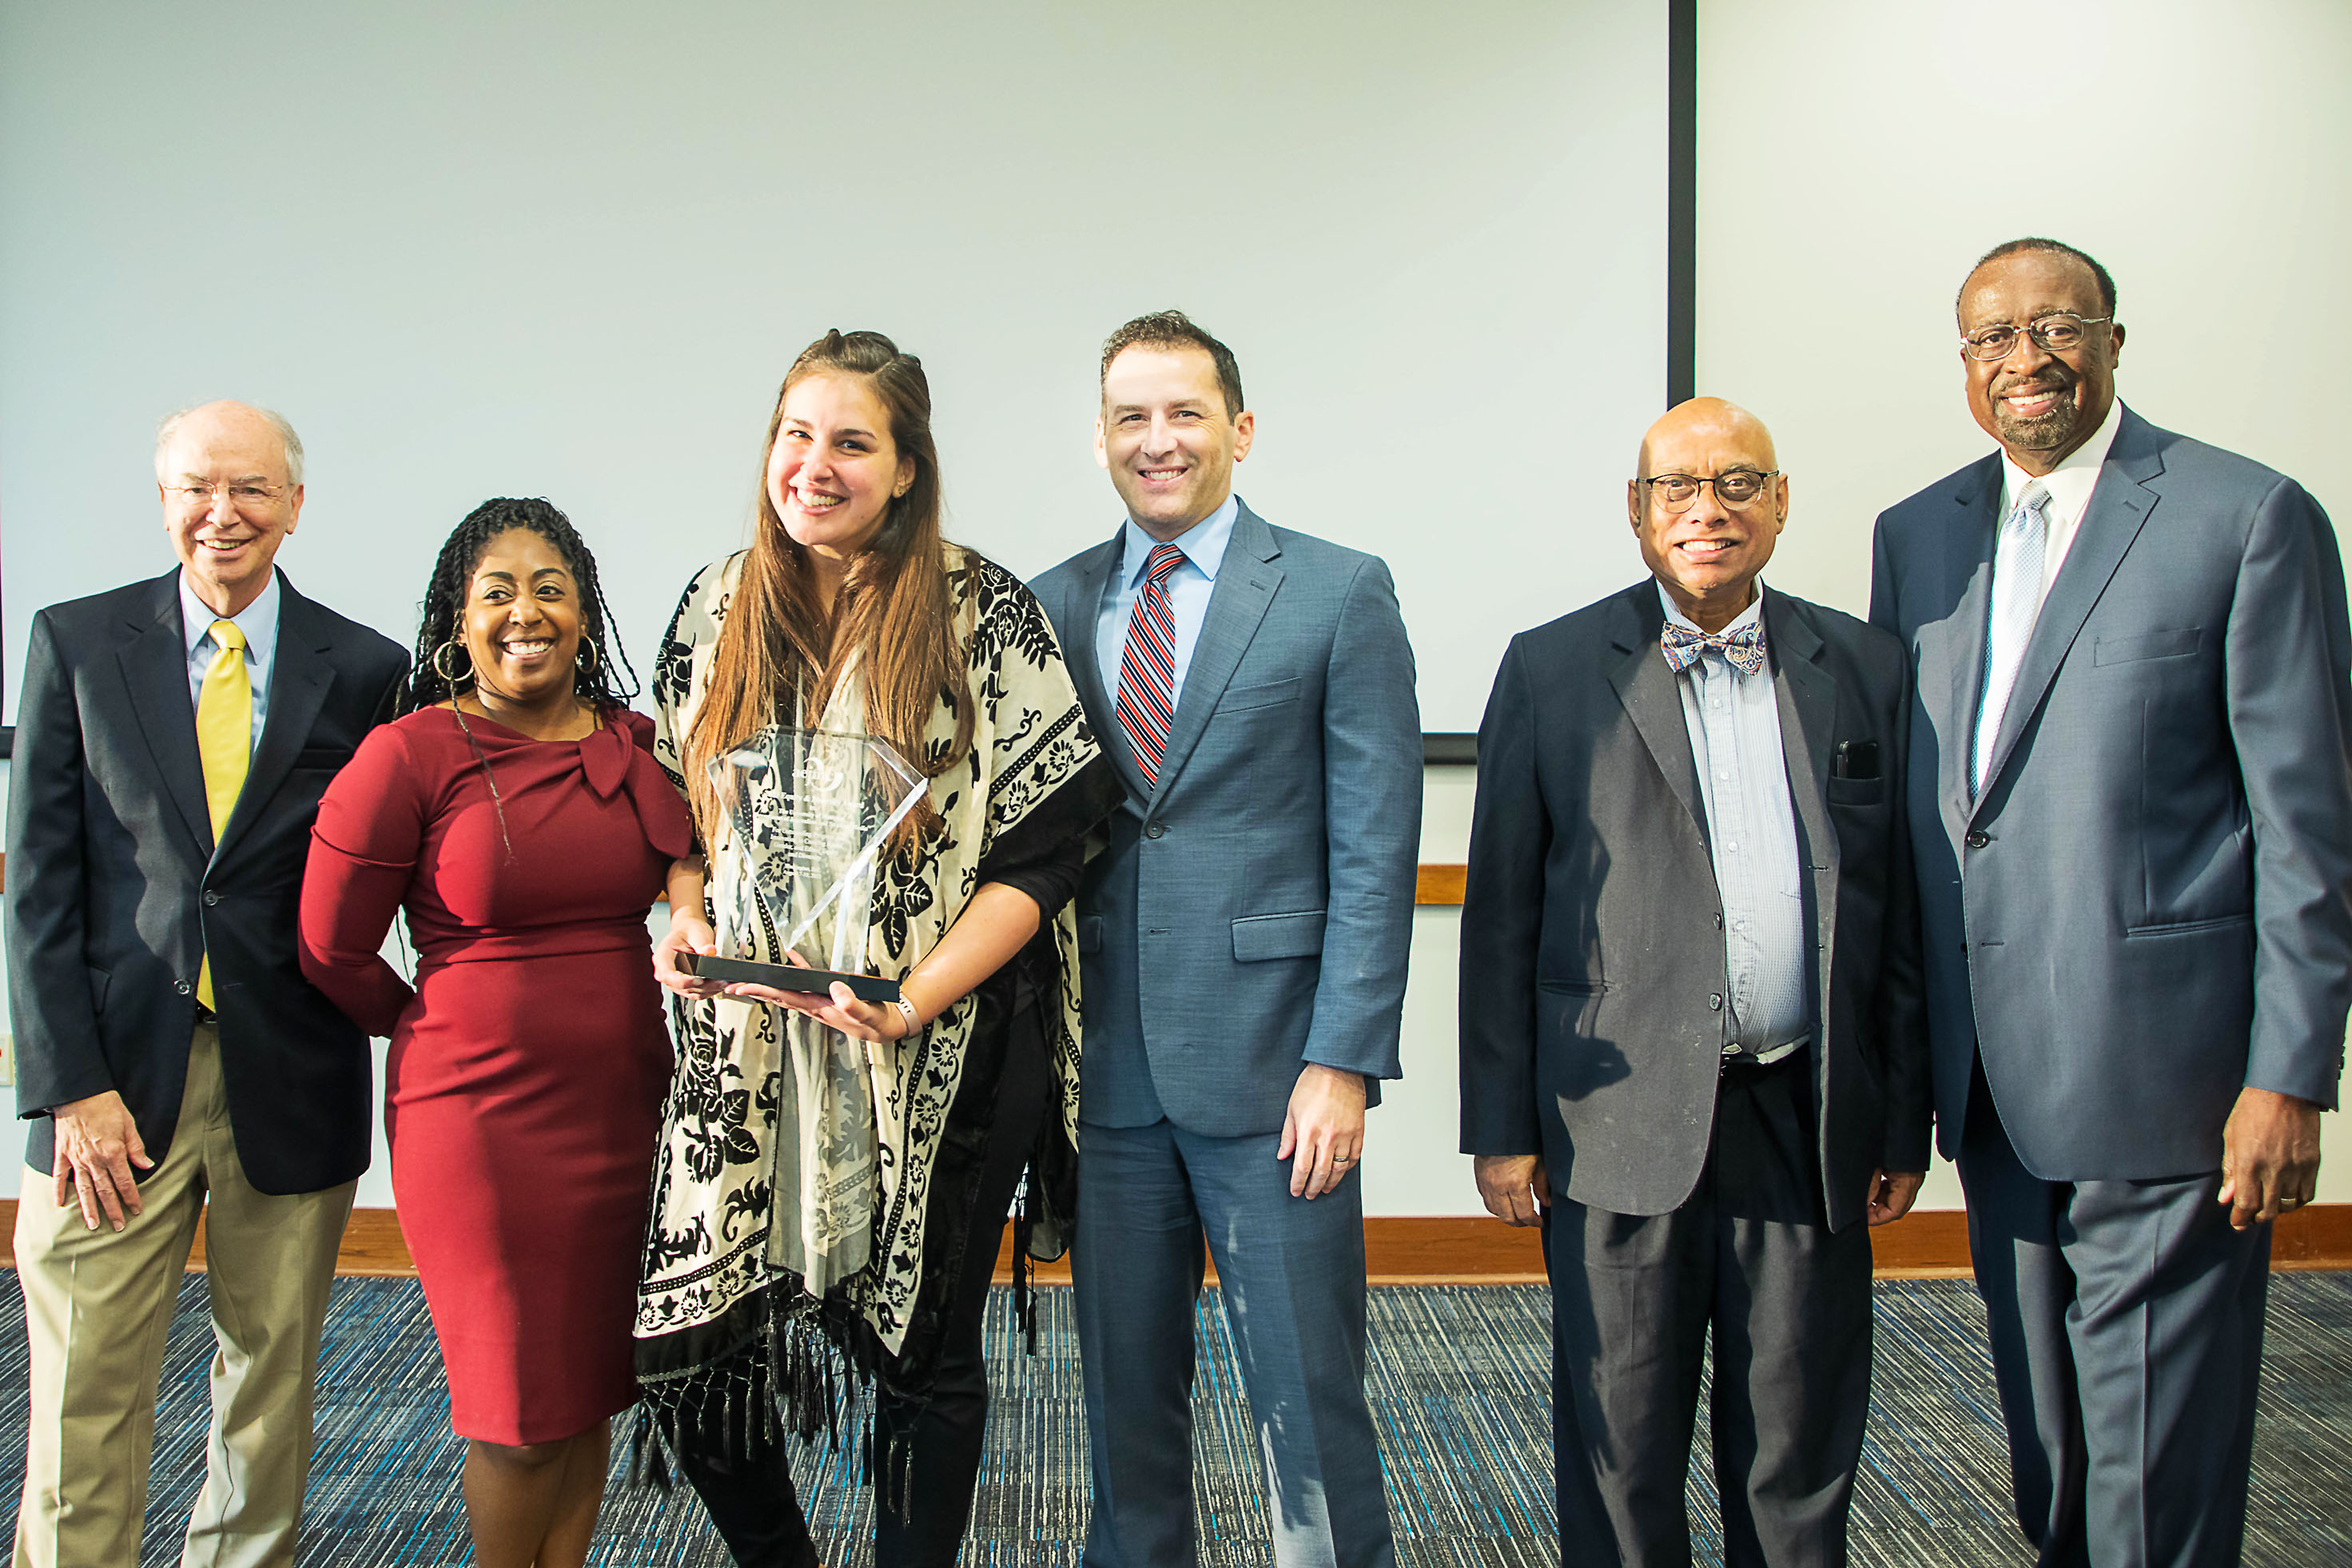 David Arant joins the JRSM Department’s Diversity Committee in accepting its award on Sept. 20. From left to right are Arant, Chalise Macklin, Taylor Ackerman, Ryan Fisher, Deb Aikat and Otis Sanford.  PHOTO/Casey Hilder